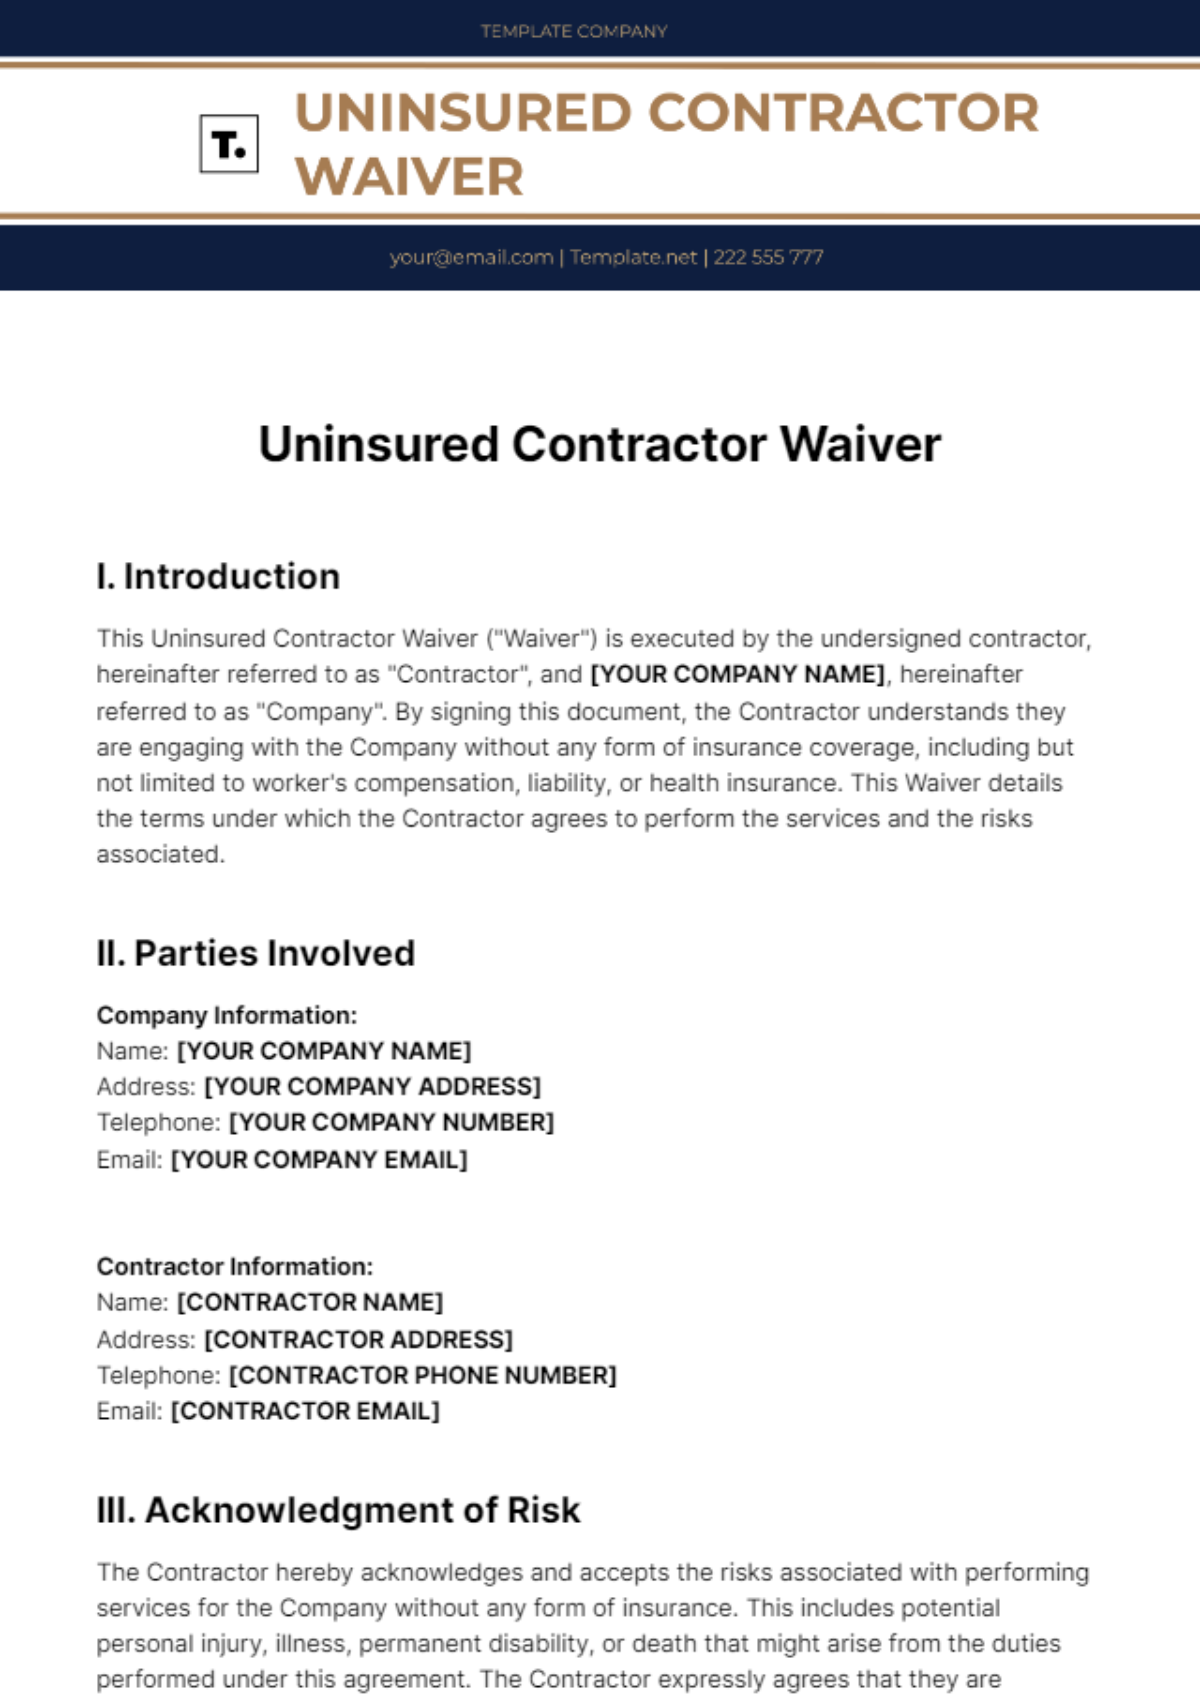 Uninsured Contractor Waiver Template